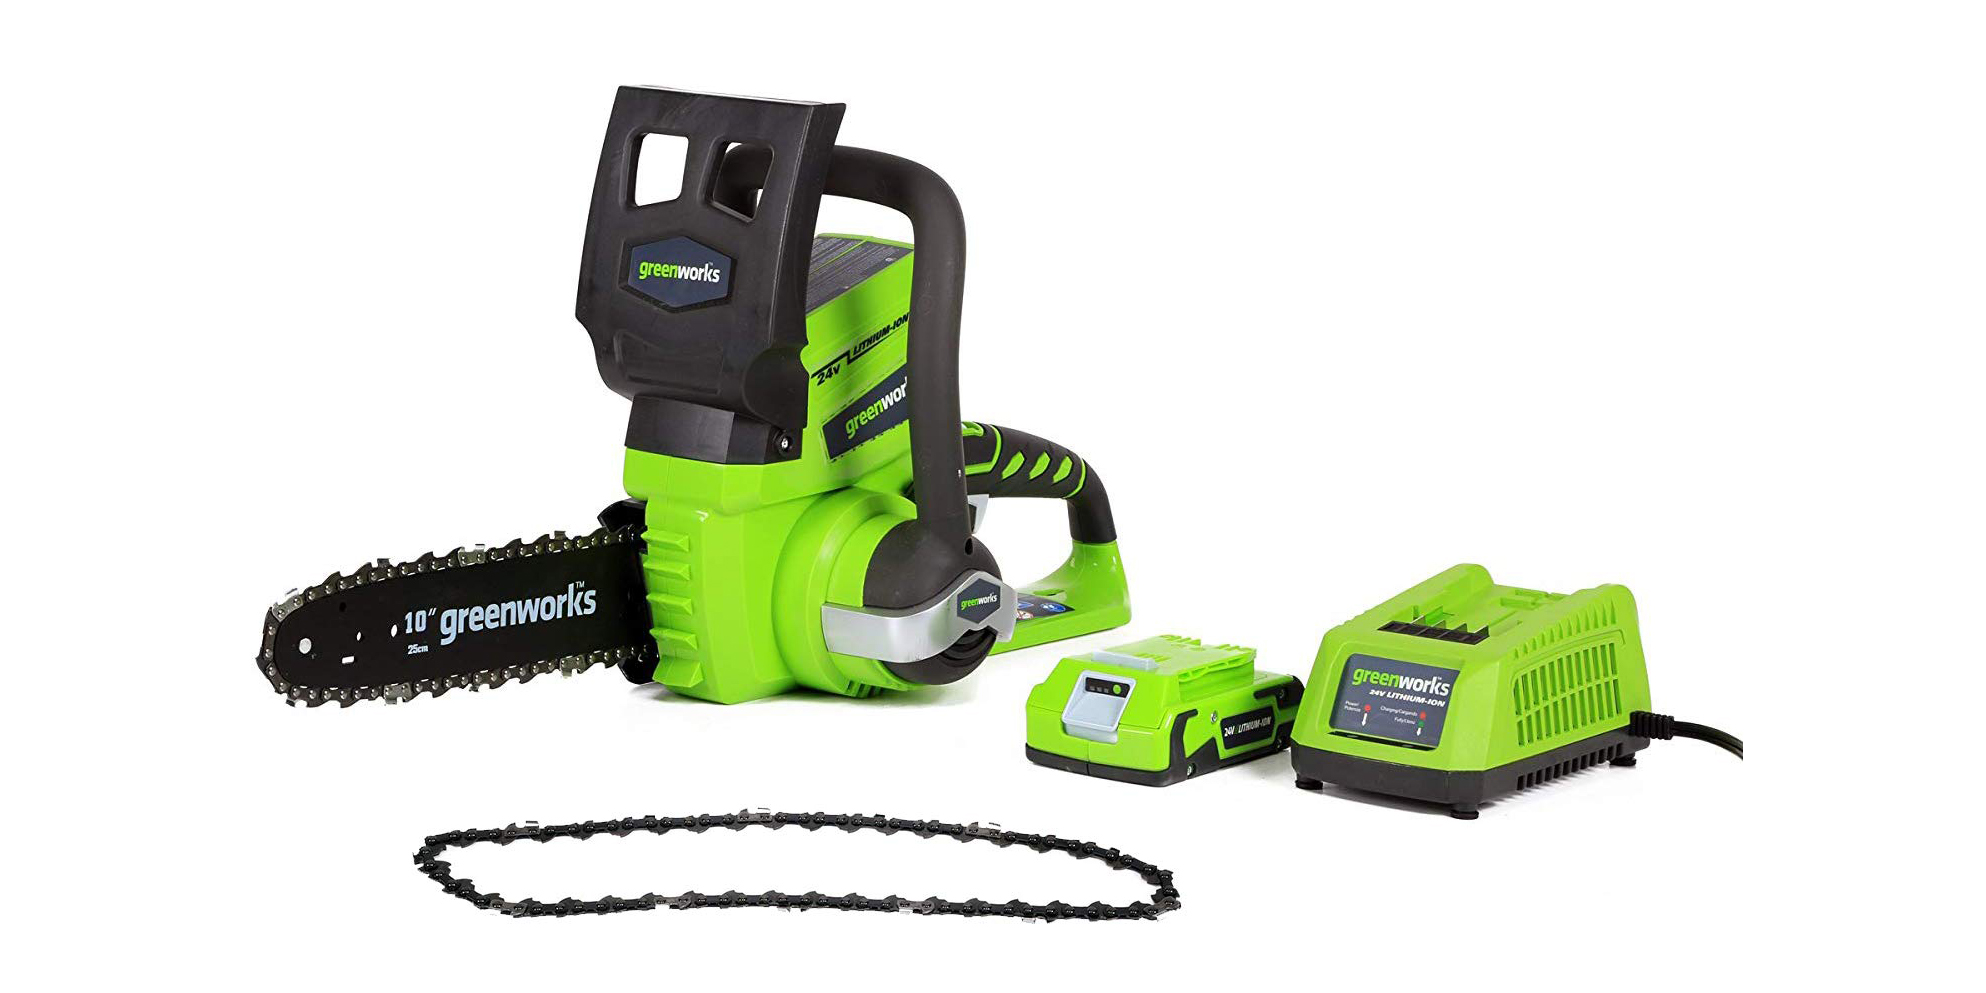 Greenworks 10-inch 24V Cordless Electric Chainsaw $50, more in today’s Green Deals